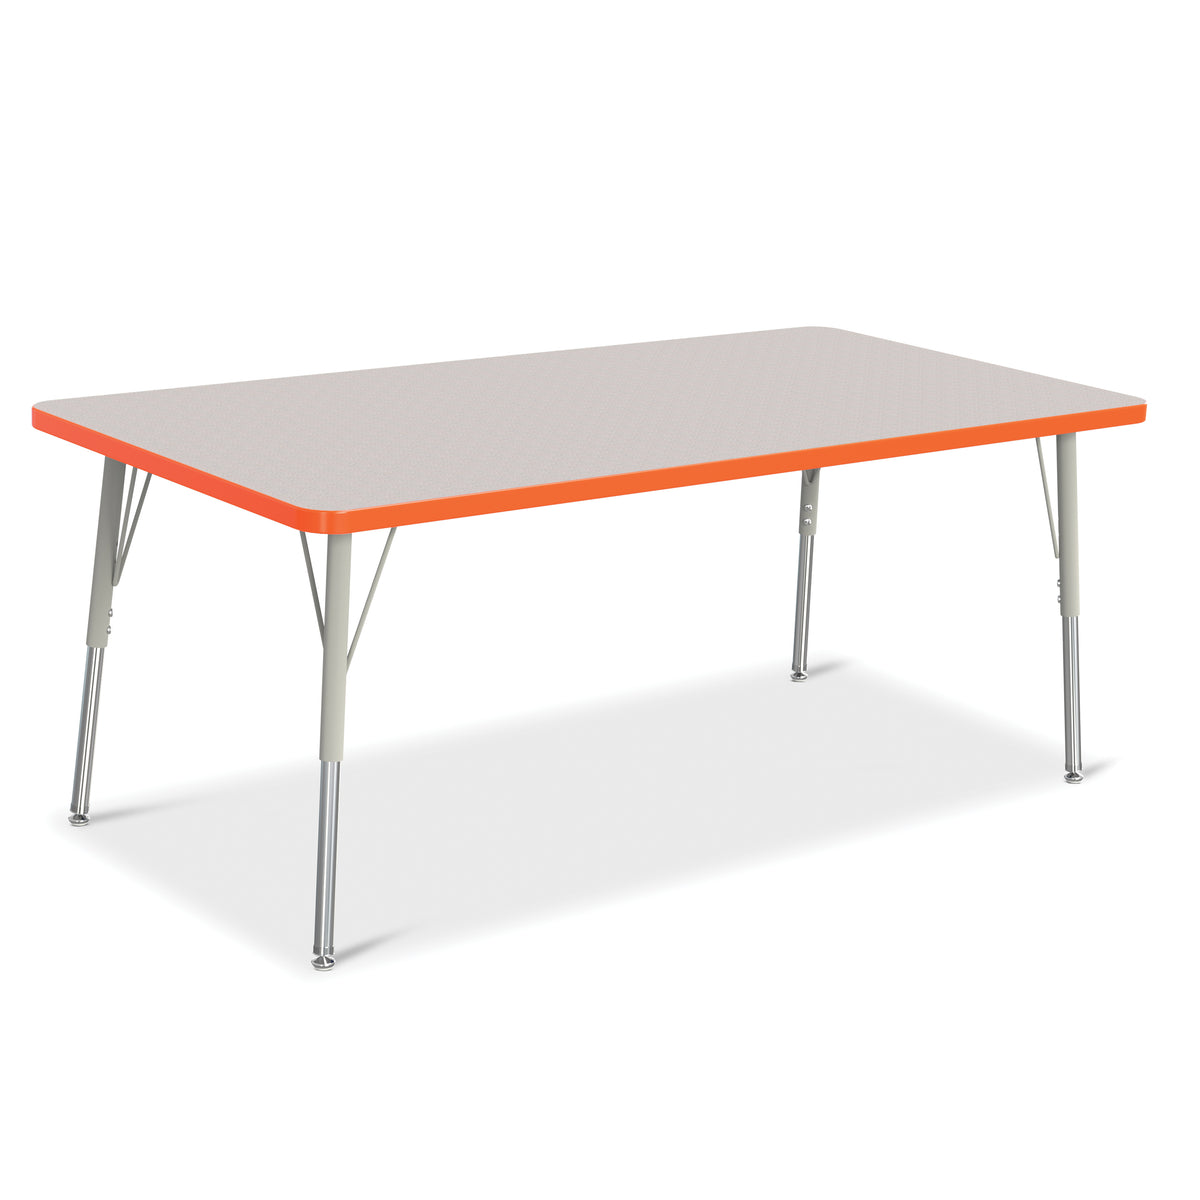 6408JCA114, Berries Rectangle Activity Table - 30" X 60", A-height - Freckled Gray/Orange/Gray